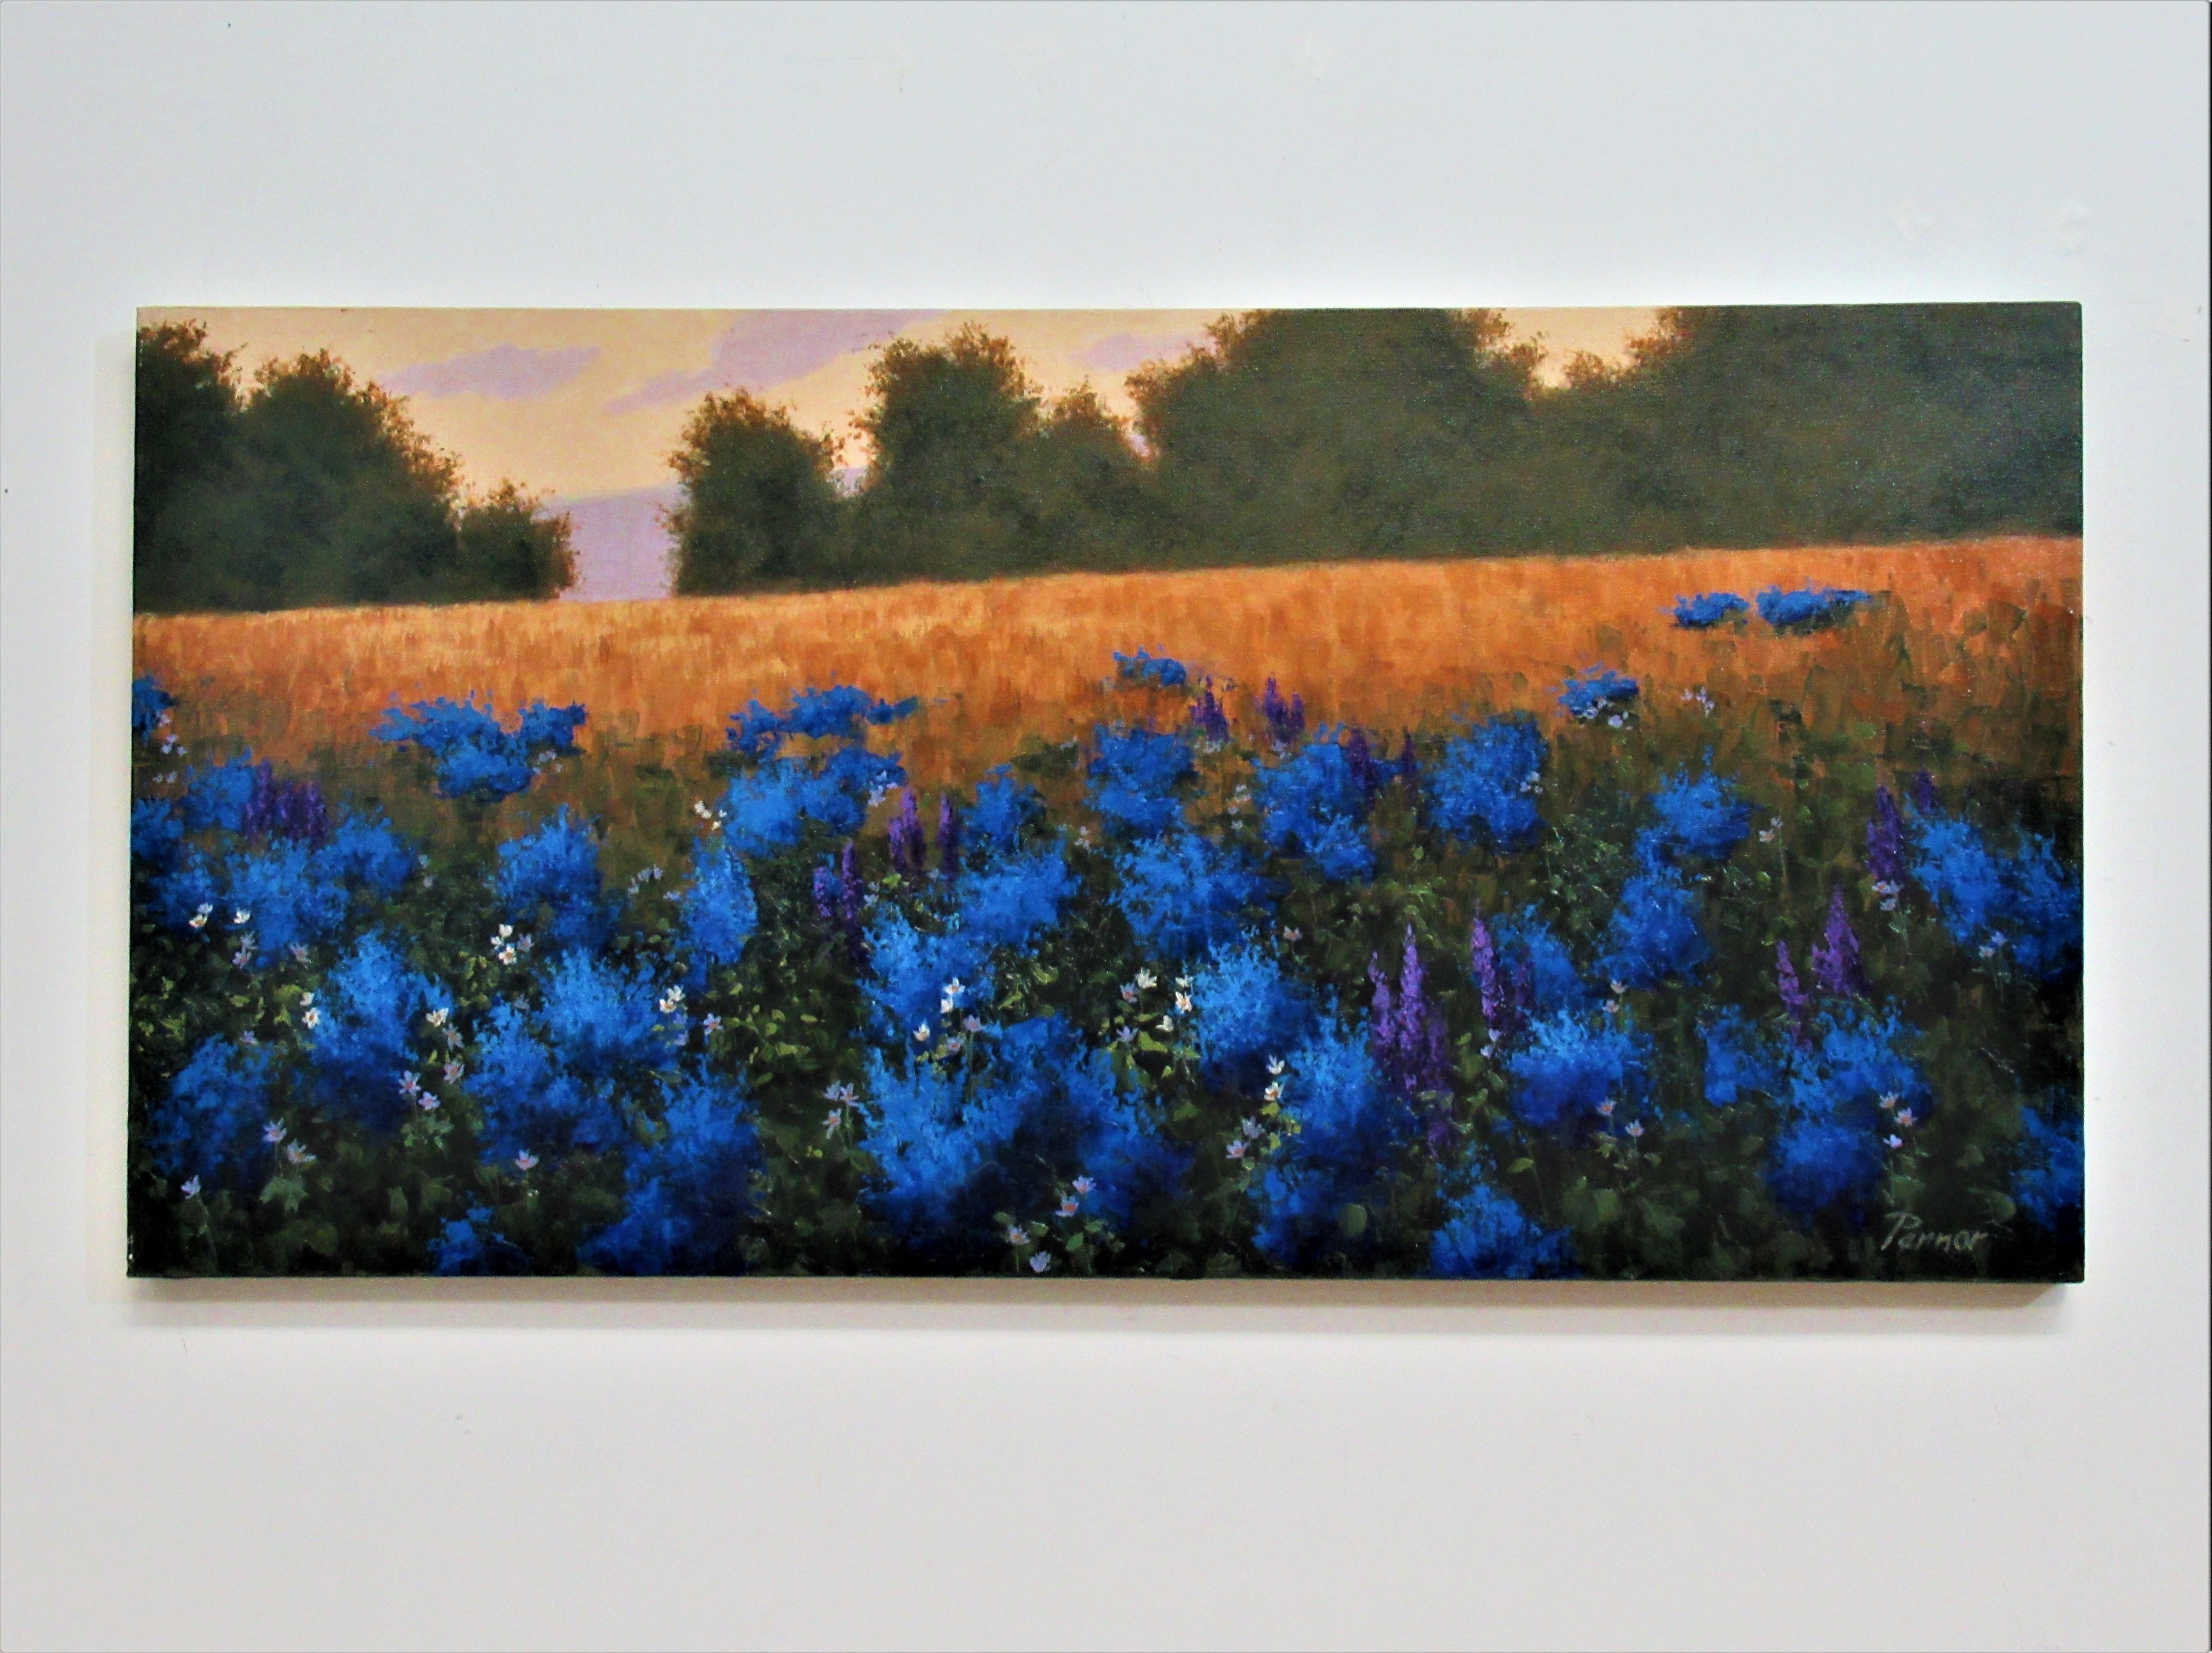 <p>Artist Comments<br>Artist Robert Pennor paints an impressionist field brimming in fresh flowers abloom. The blues, greens, and gold harmonize in the landscape as the sun sets on the horizon. Robert applies paint with various brushes to achieve